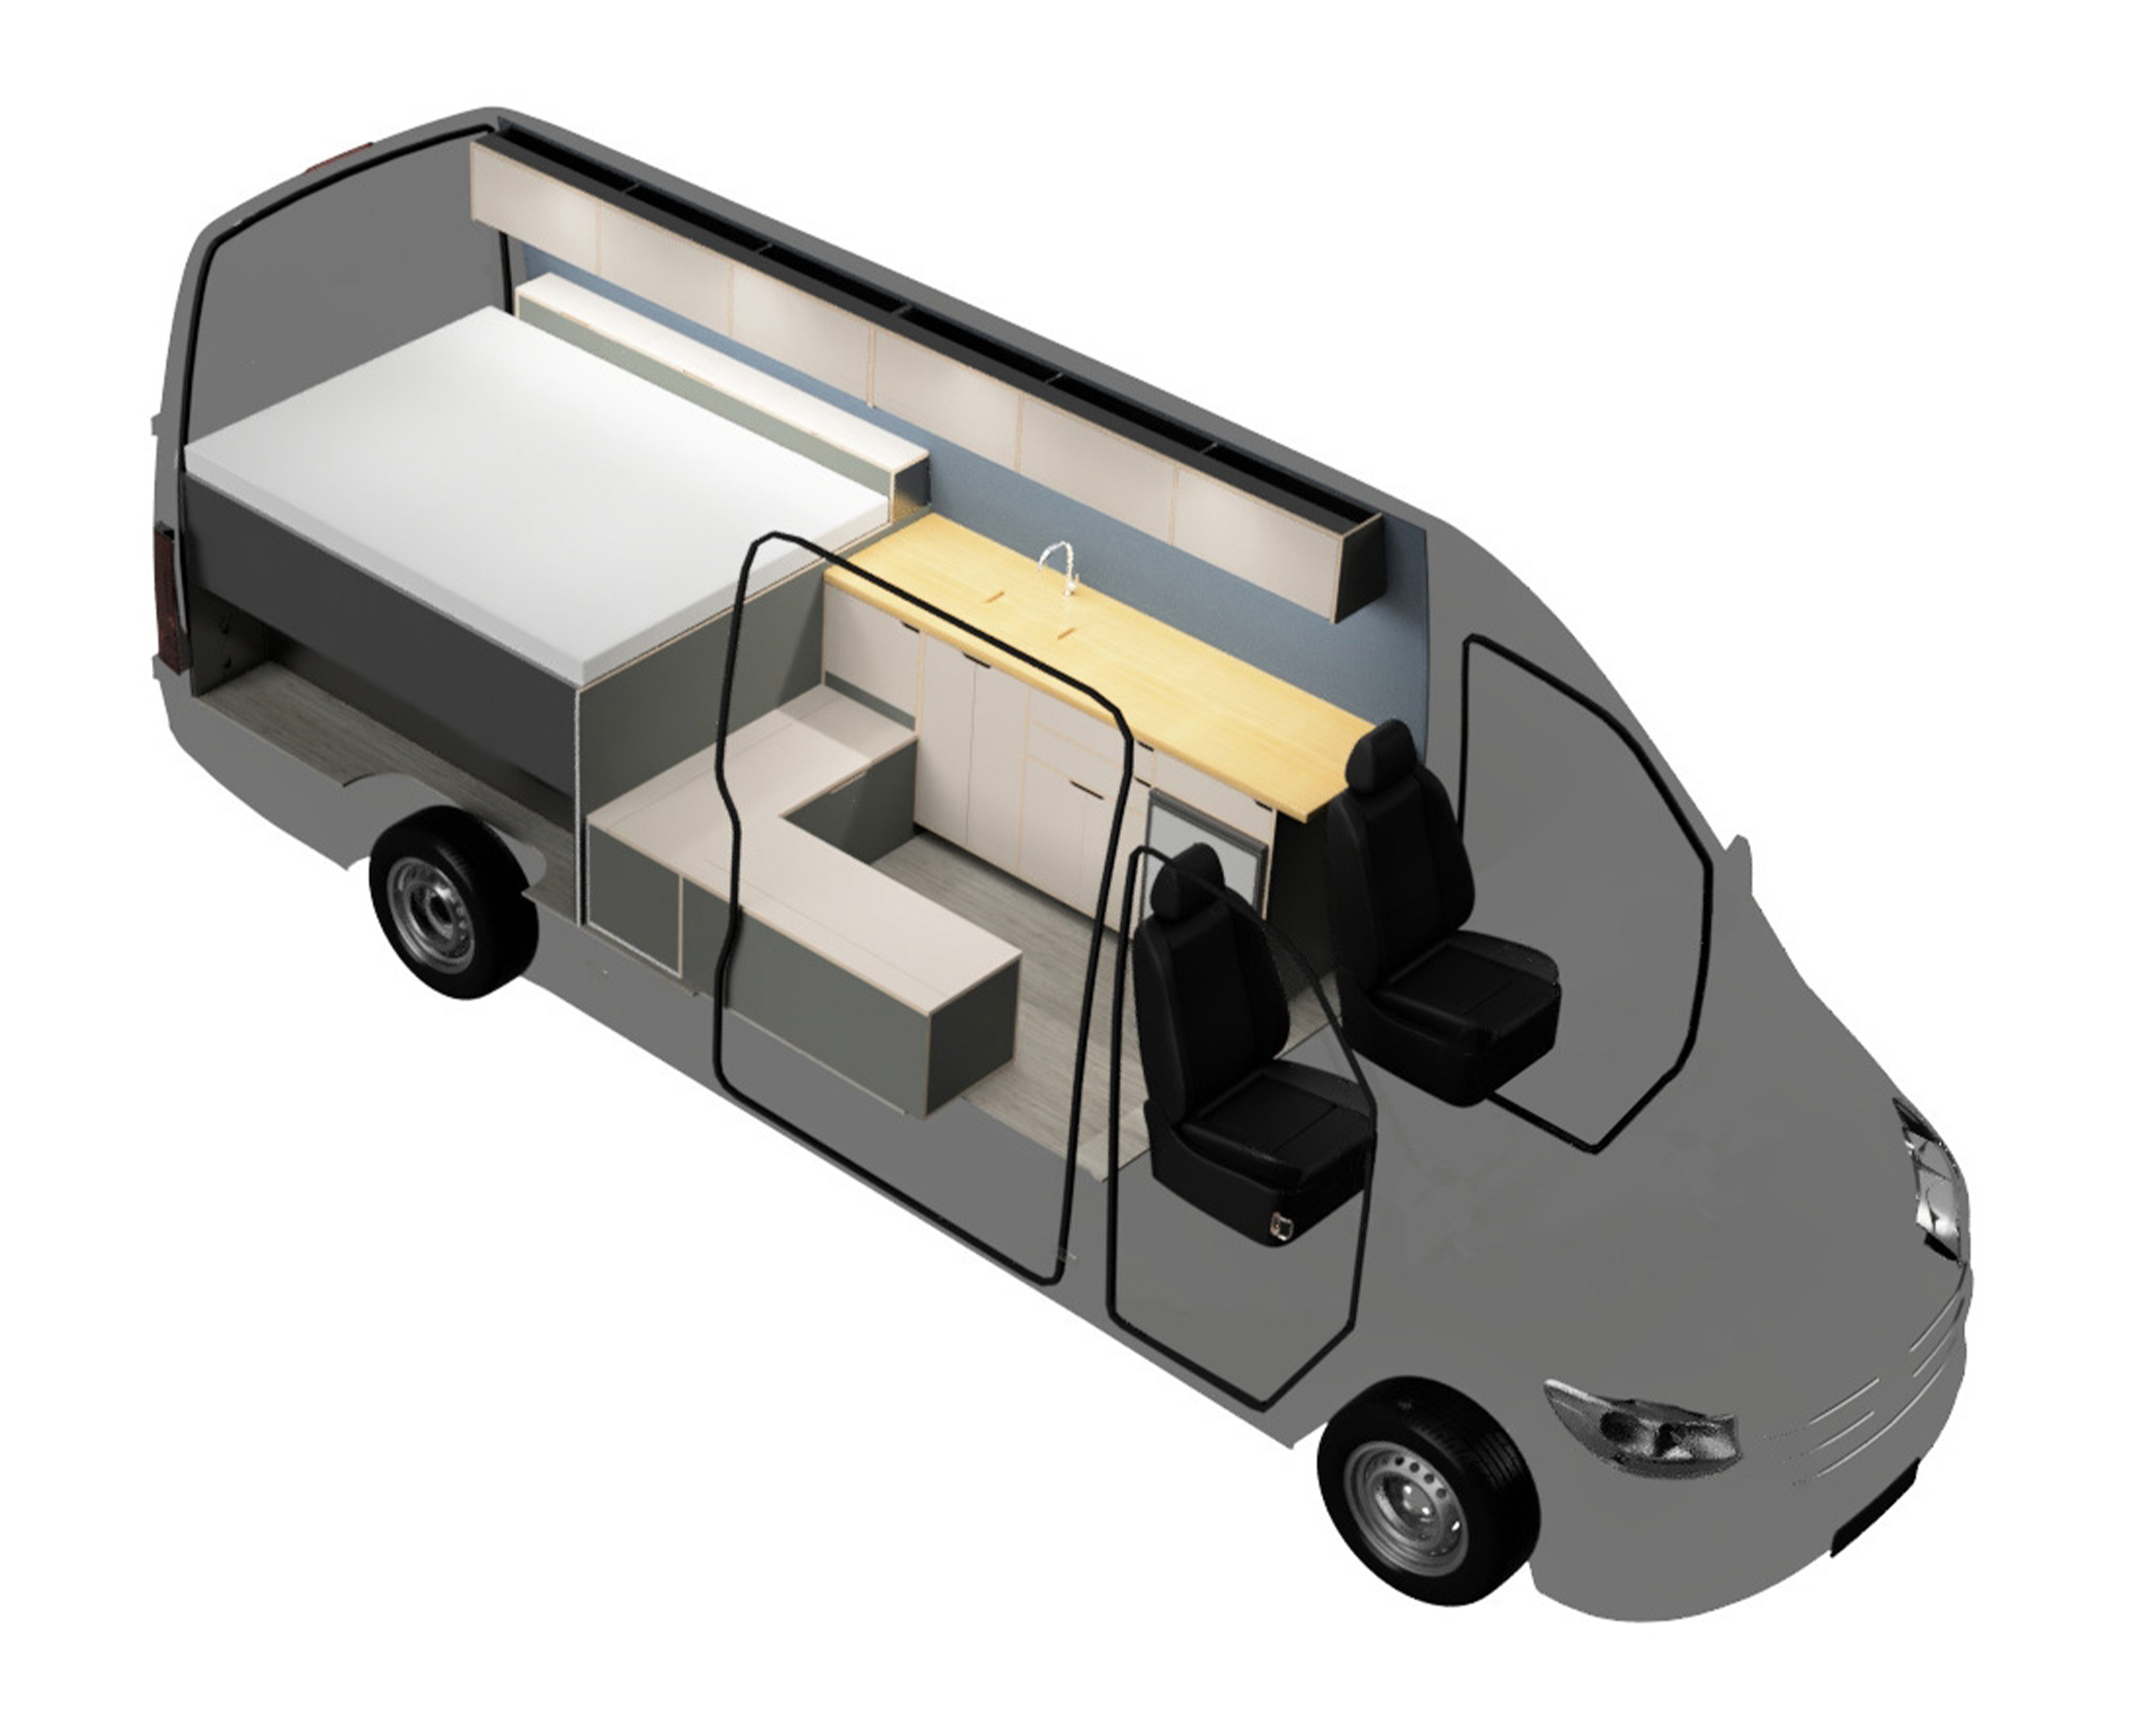 The Outpost Sprinter Van Conversion Layout by The Vansmith